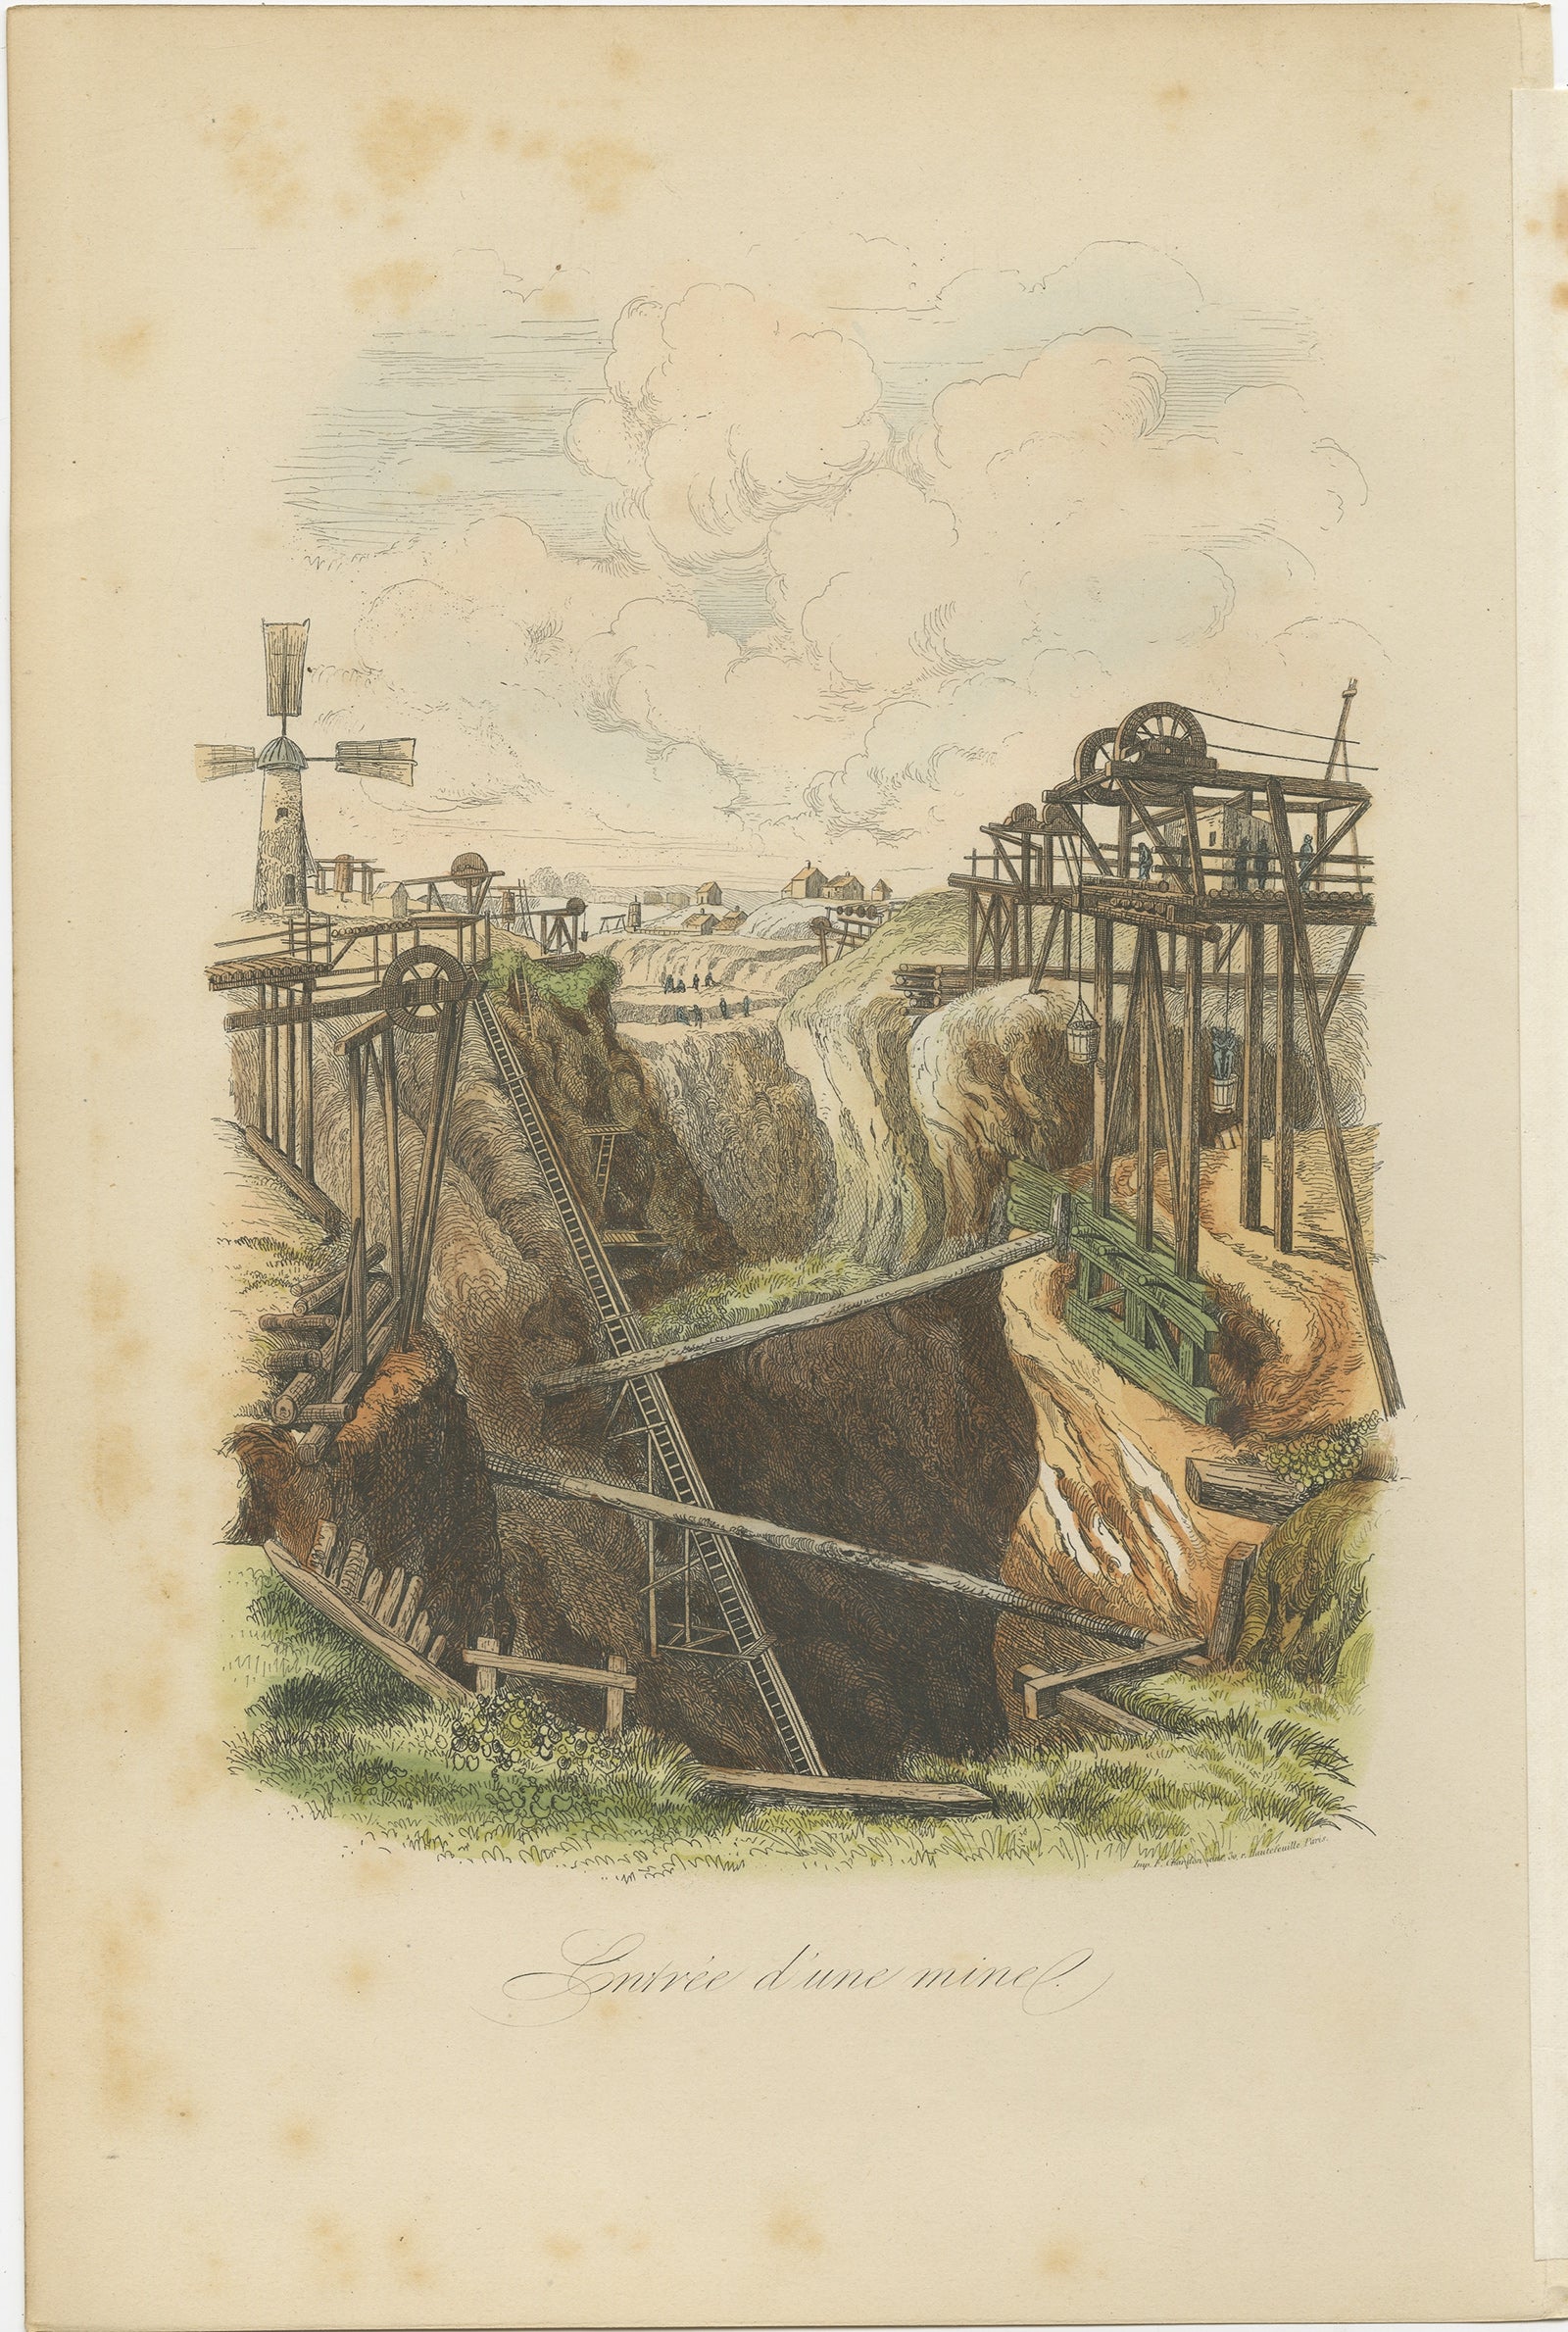 Antique print titled 'Entrée d'une mine'. Print of the entrance to a mine. This print originates from 'Musée d'Histoire Naturelle' by M. Achille Comte.

Artists and Engravers: Published by Gustave Havard.

Condition: Good, general age-related